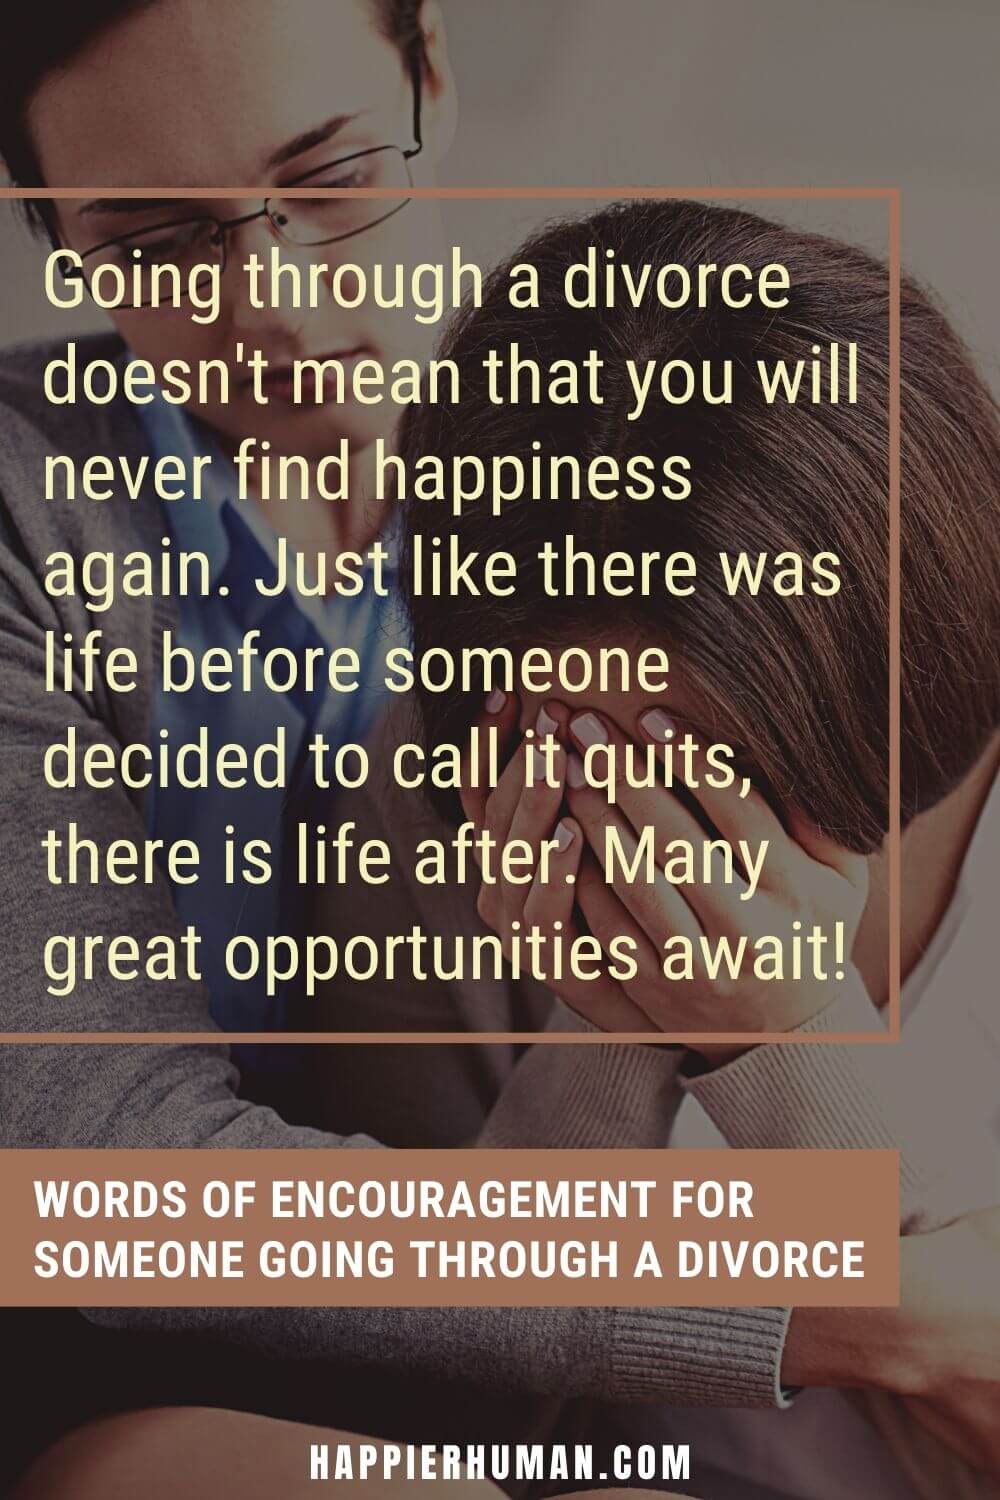 Words of Encouragement for someone going through a Divorce - Going through a divorce doesn't mean that you will never find happiness again. Just like there was life before someone decided to call it quits, there is life after. Many great opportunities await! | child going through divorce quotes | divorce message to girlfriend | words of encouragement for divorced friends